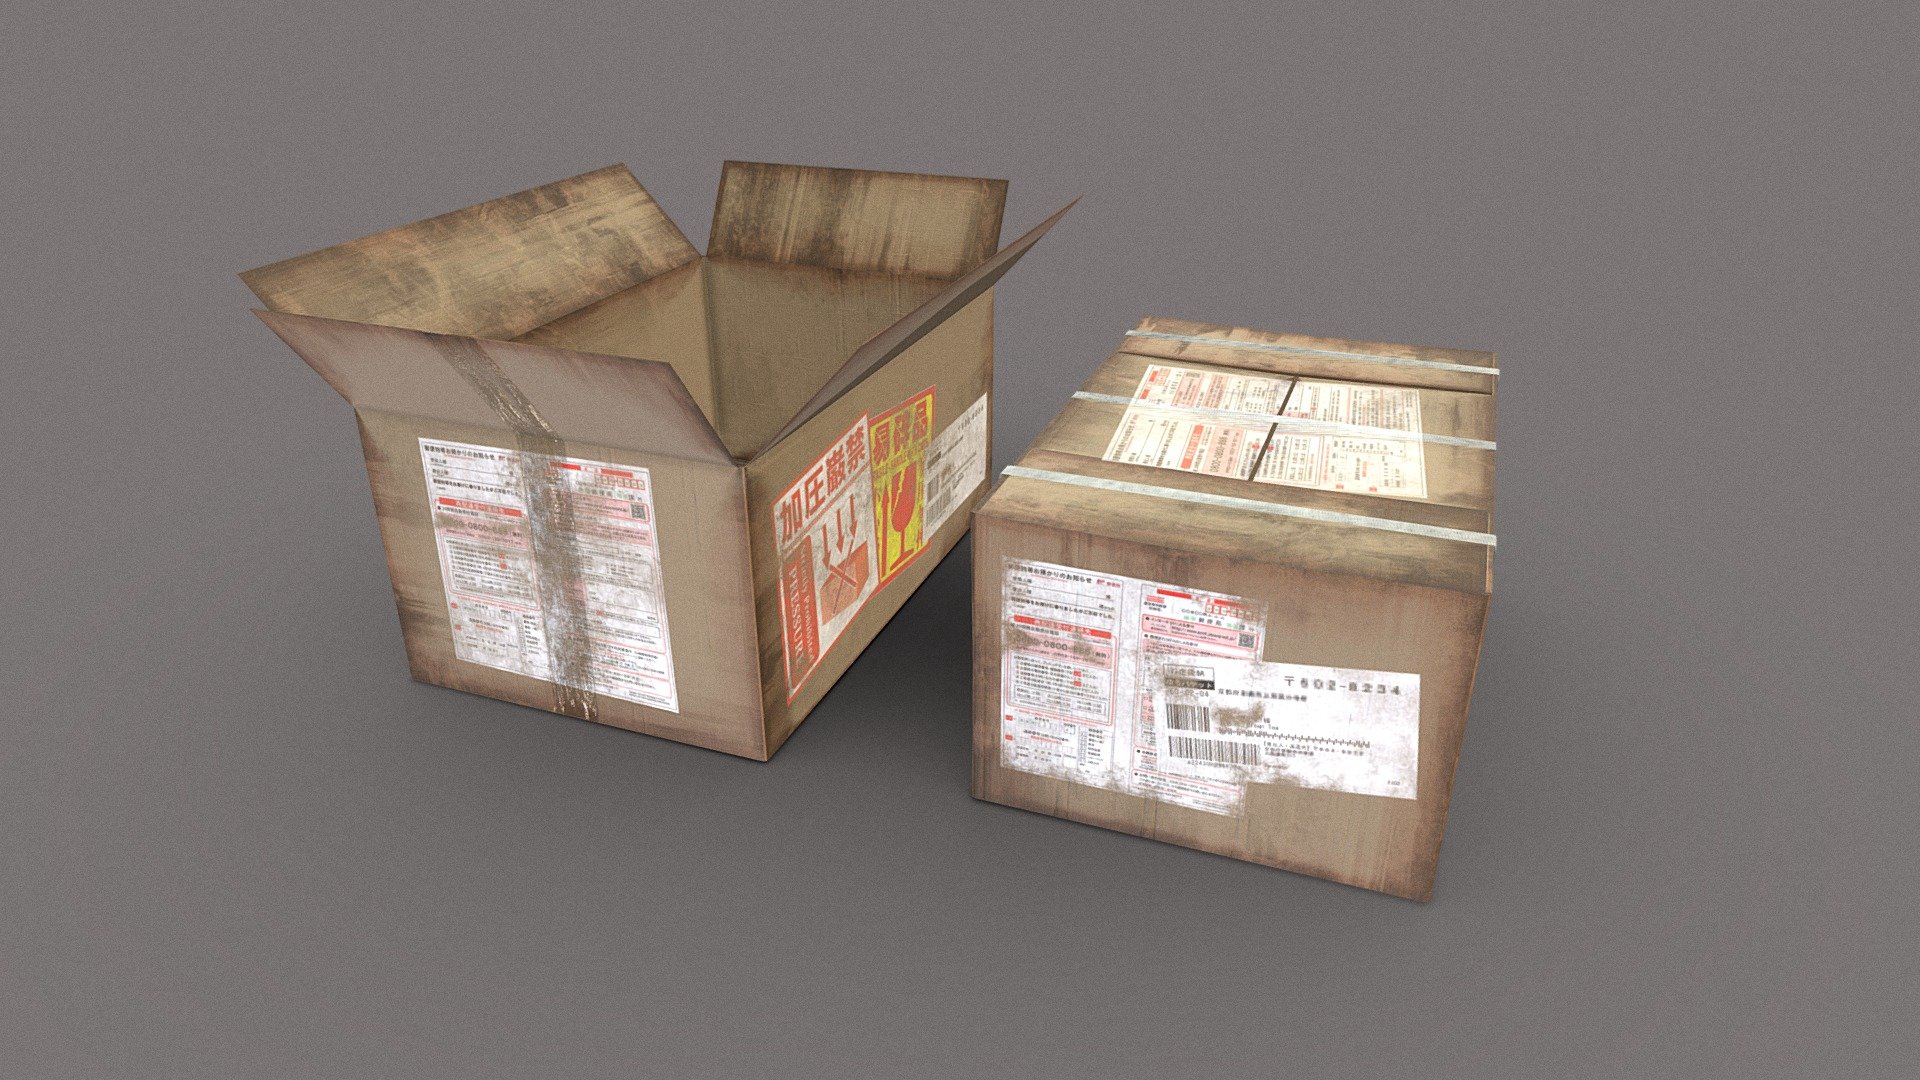 A pair of worn cardboxes with Japanese shipping labels.  One is open and the other is closed.  

Handy prop for any sort of abandoned / post apocalyptic environment. 

PBR textures @4k - Worn cardboard boxes - Japanese labels - Buy Royalty Free 3D model by Sousinho 3d model